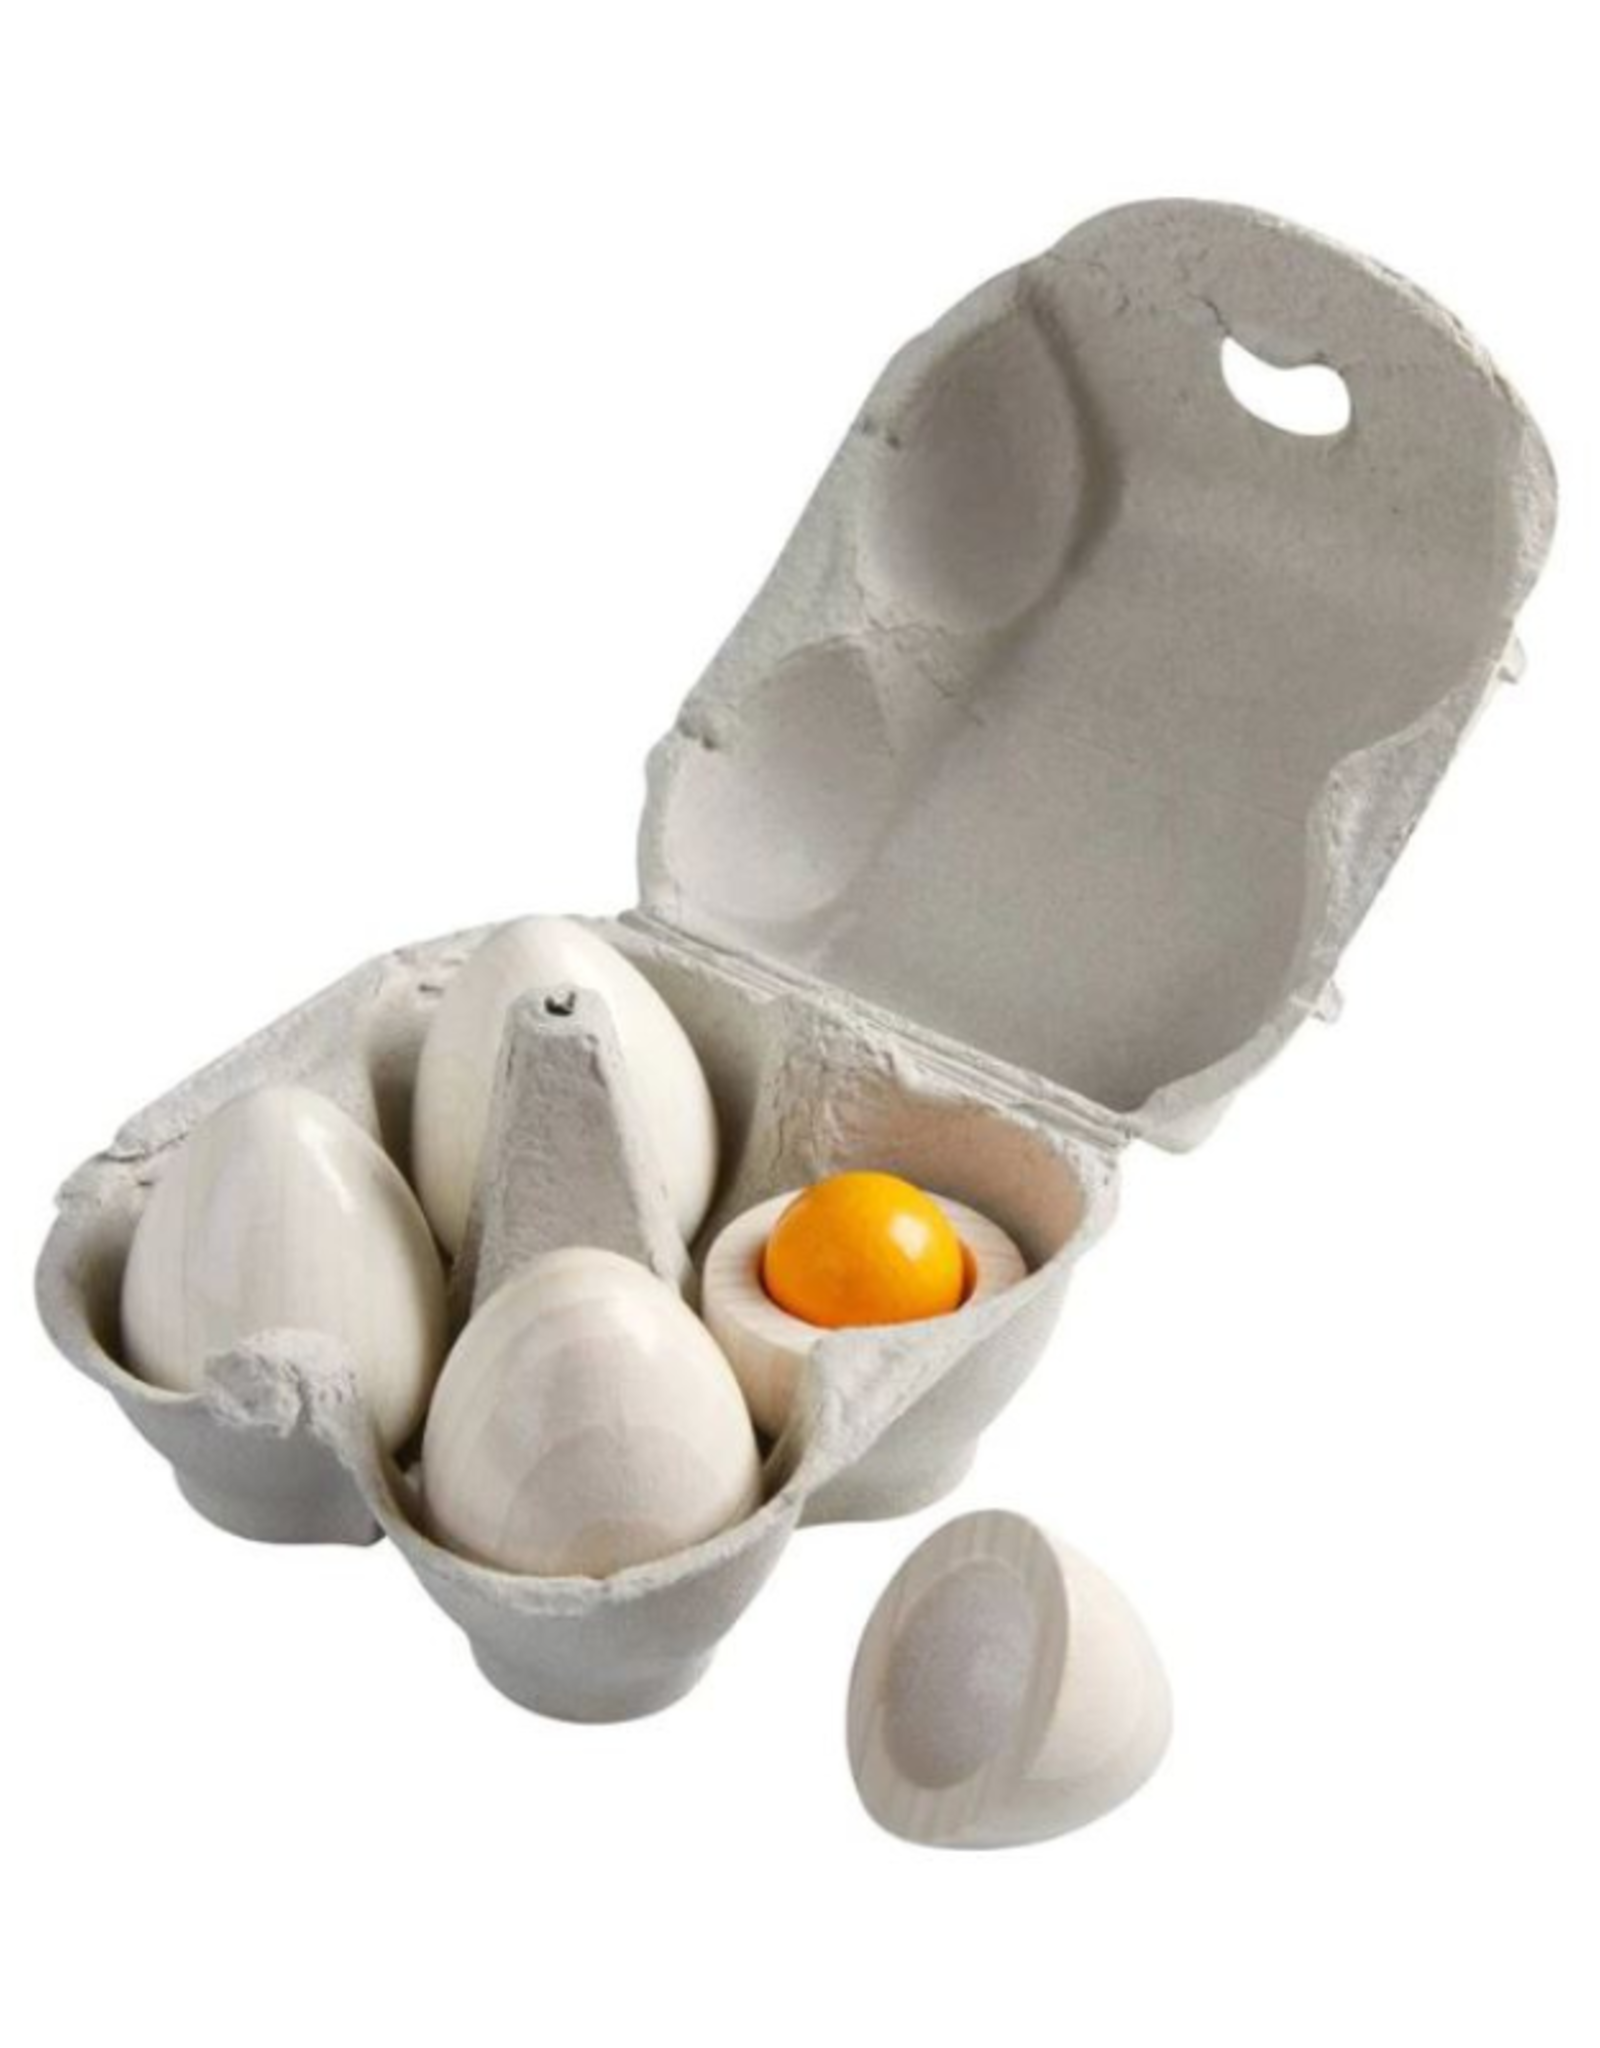 Wooden Eggs with Removable Yolk Play Food